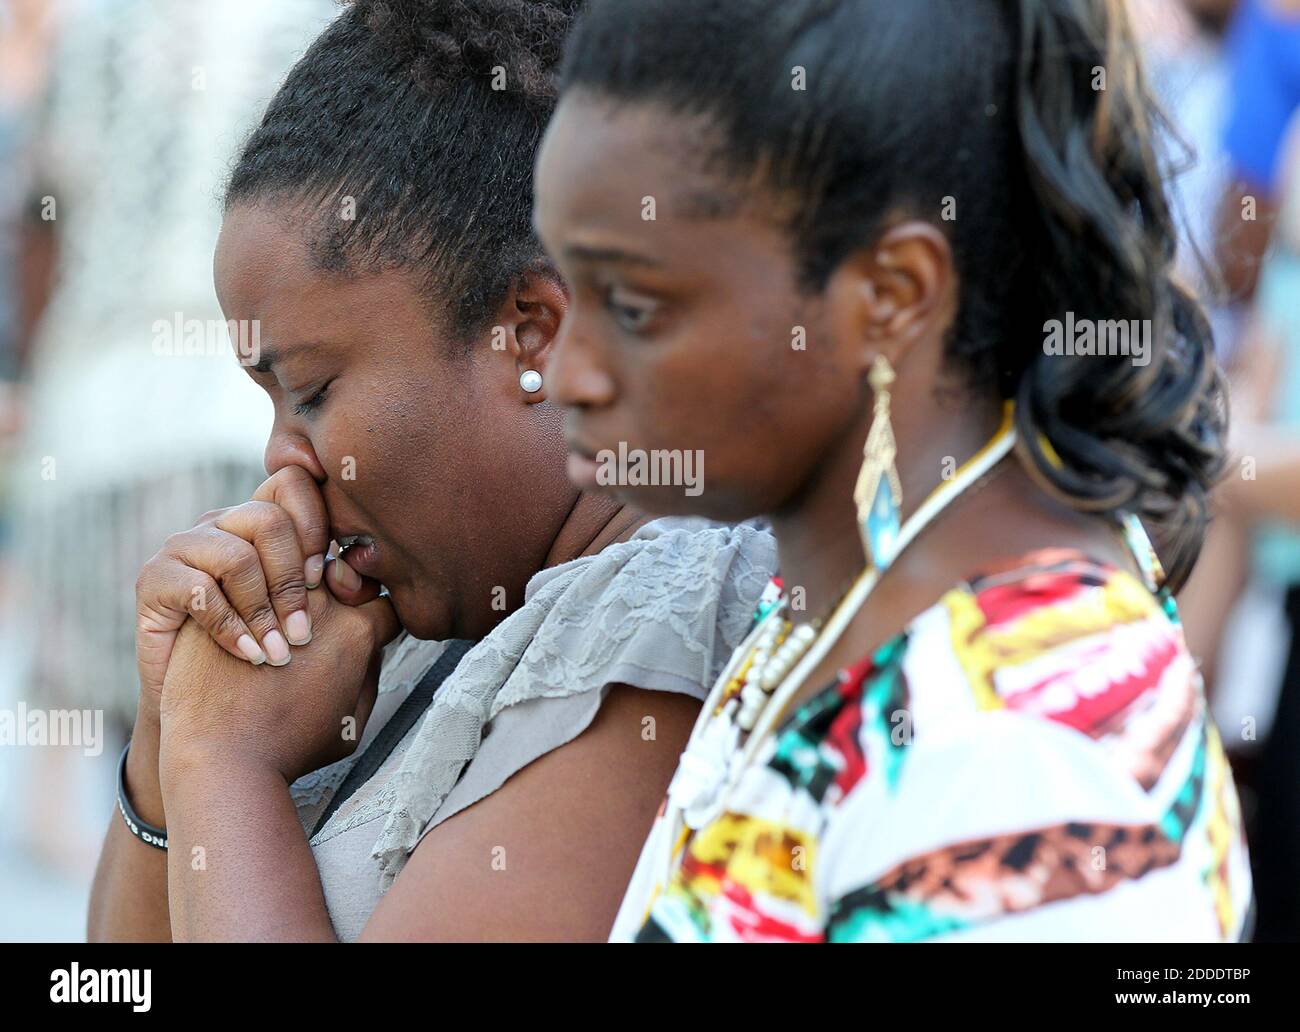 NO FILM, NO VIDEO, NO TV, NO DOCUMENTARY - A pair of women grieve while paying their respects at the Emanuel AME Church, where nine people were killed on Thursday, June 18, 2015, in Charleston, SC, USA. Photo by Curtis Compton/Atlanta Journal-Constitution/TNS/ABACAPRESS.COM Stock Photo